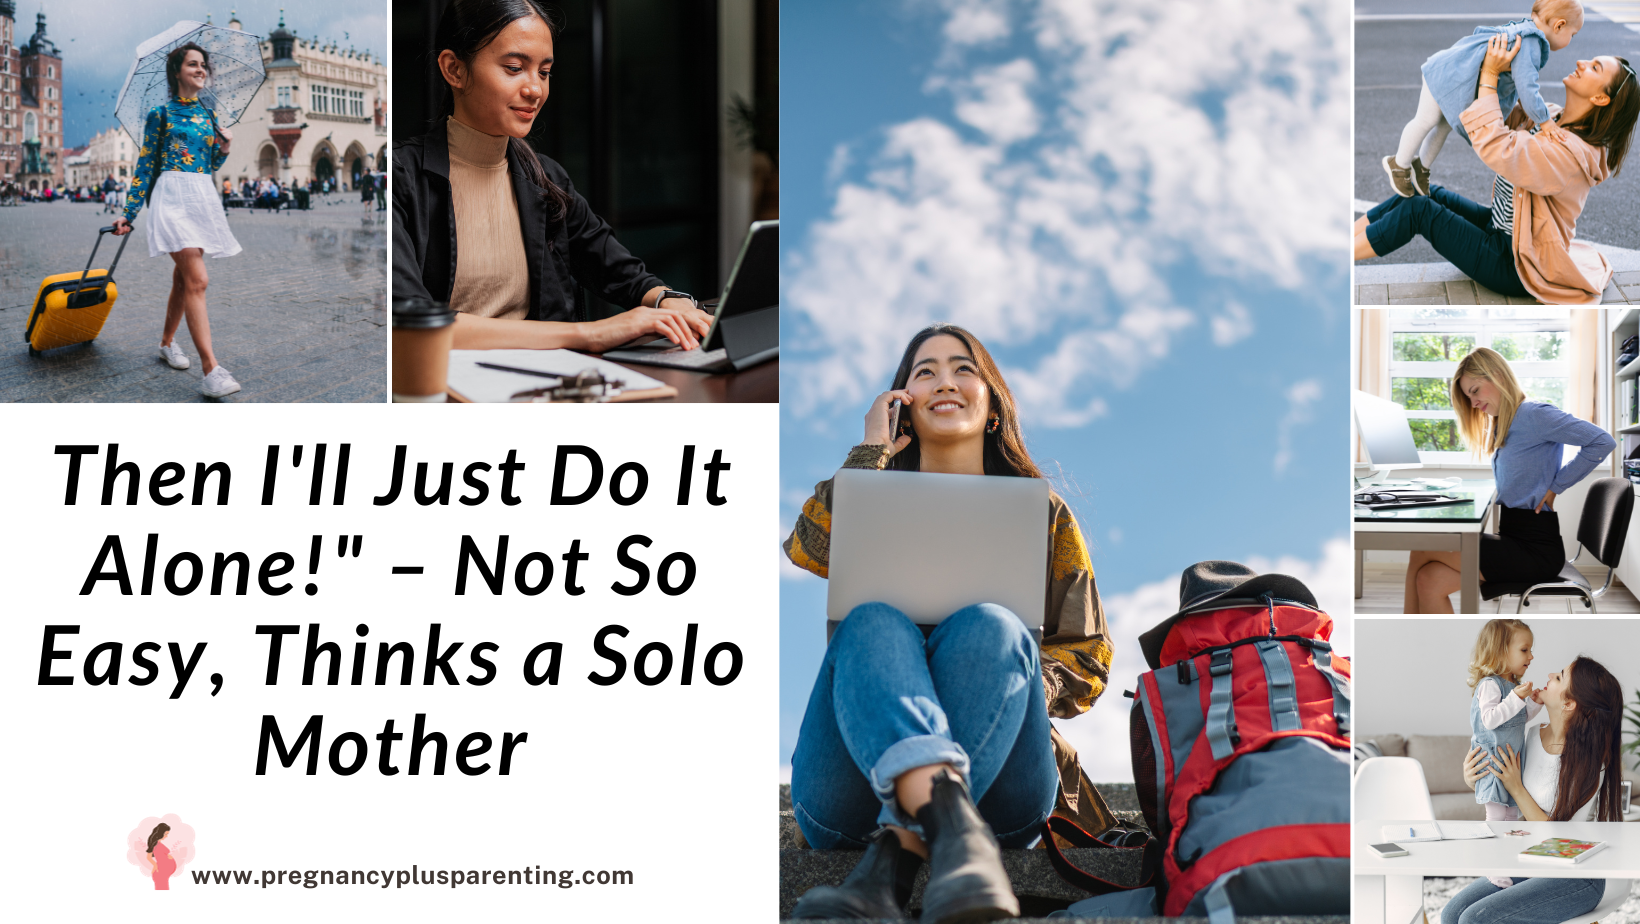 Then I'll Just Do It Alone!" – Not So Easy, Thinks a Solo Mother